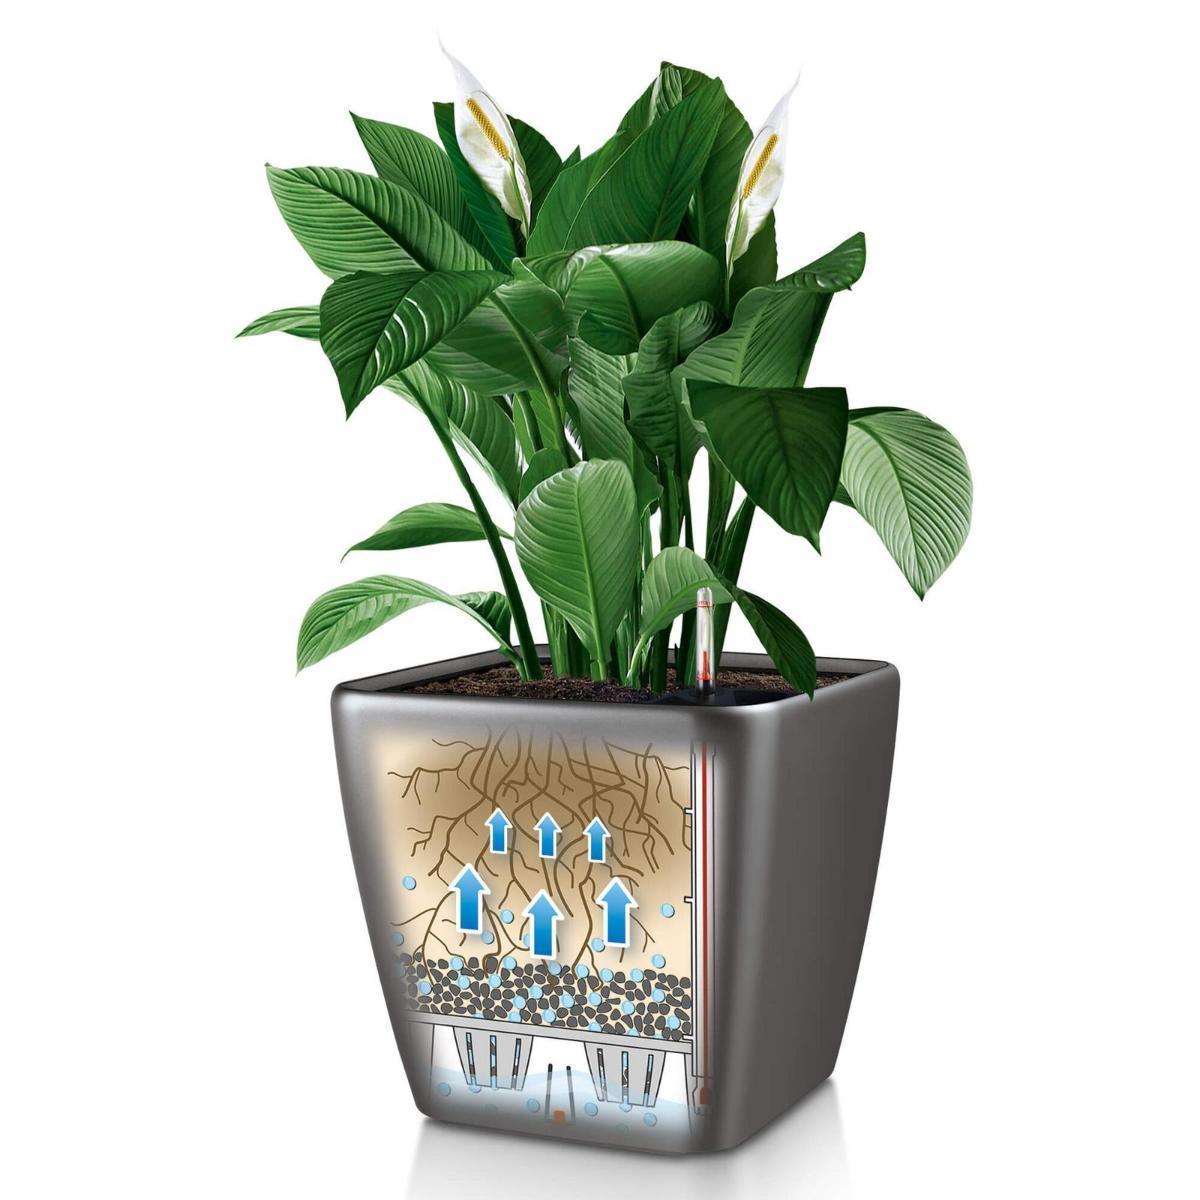 Set of two LECHUZA CUBICO Color Slate Self Watering Planters Indoor/Outdoor Flower Pots: L22 W22 H41 cm, 6 litres Cap + L30 W30 H56 cm, 14 litres Cap - citiplants.com